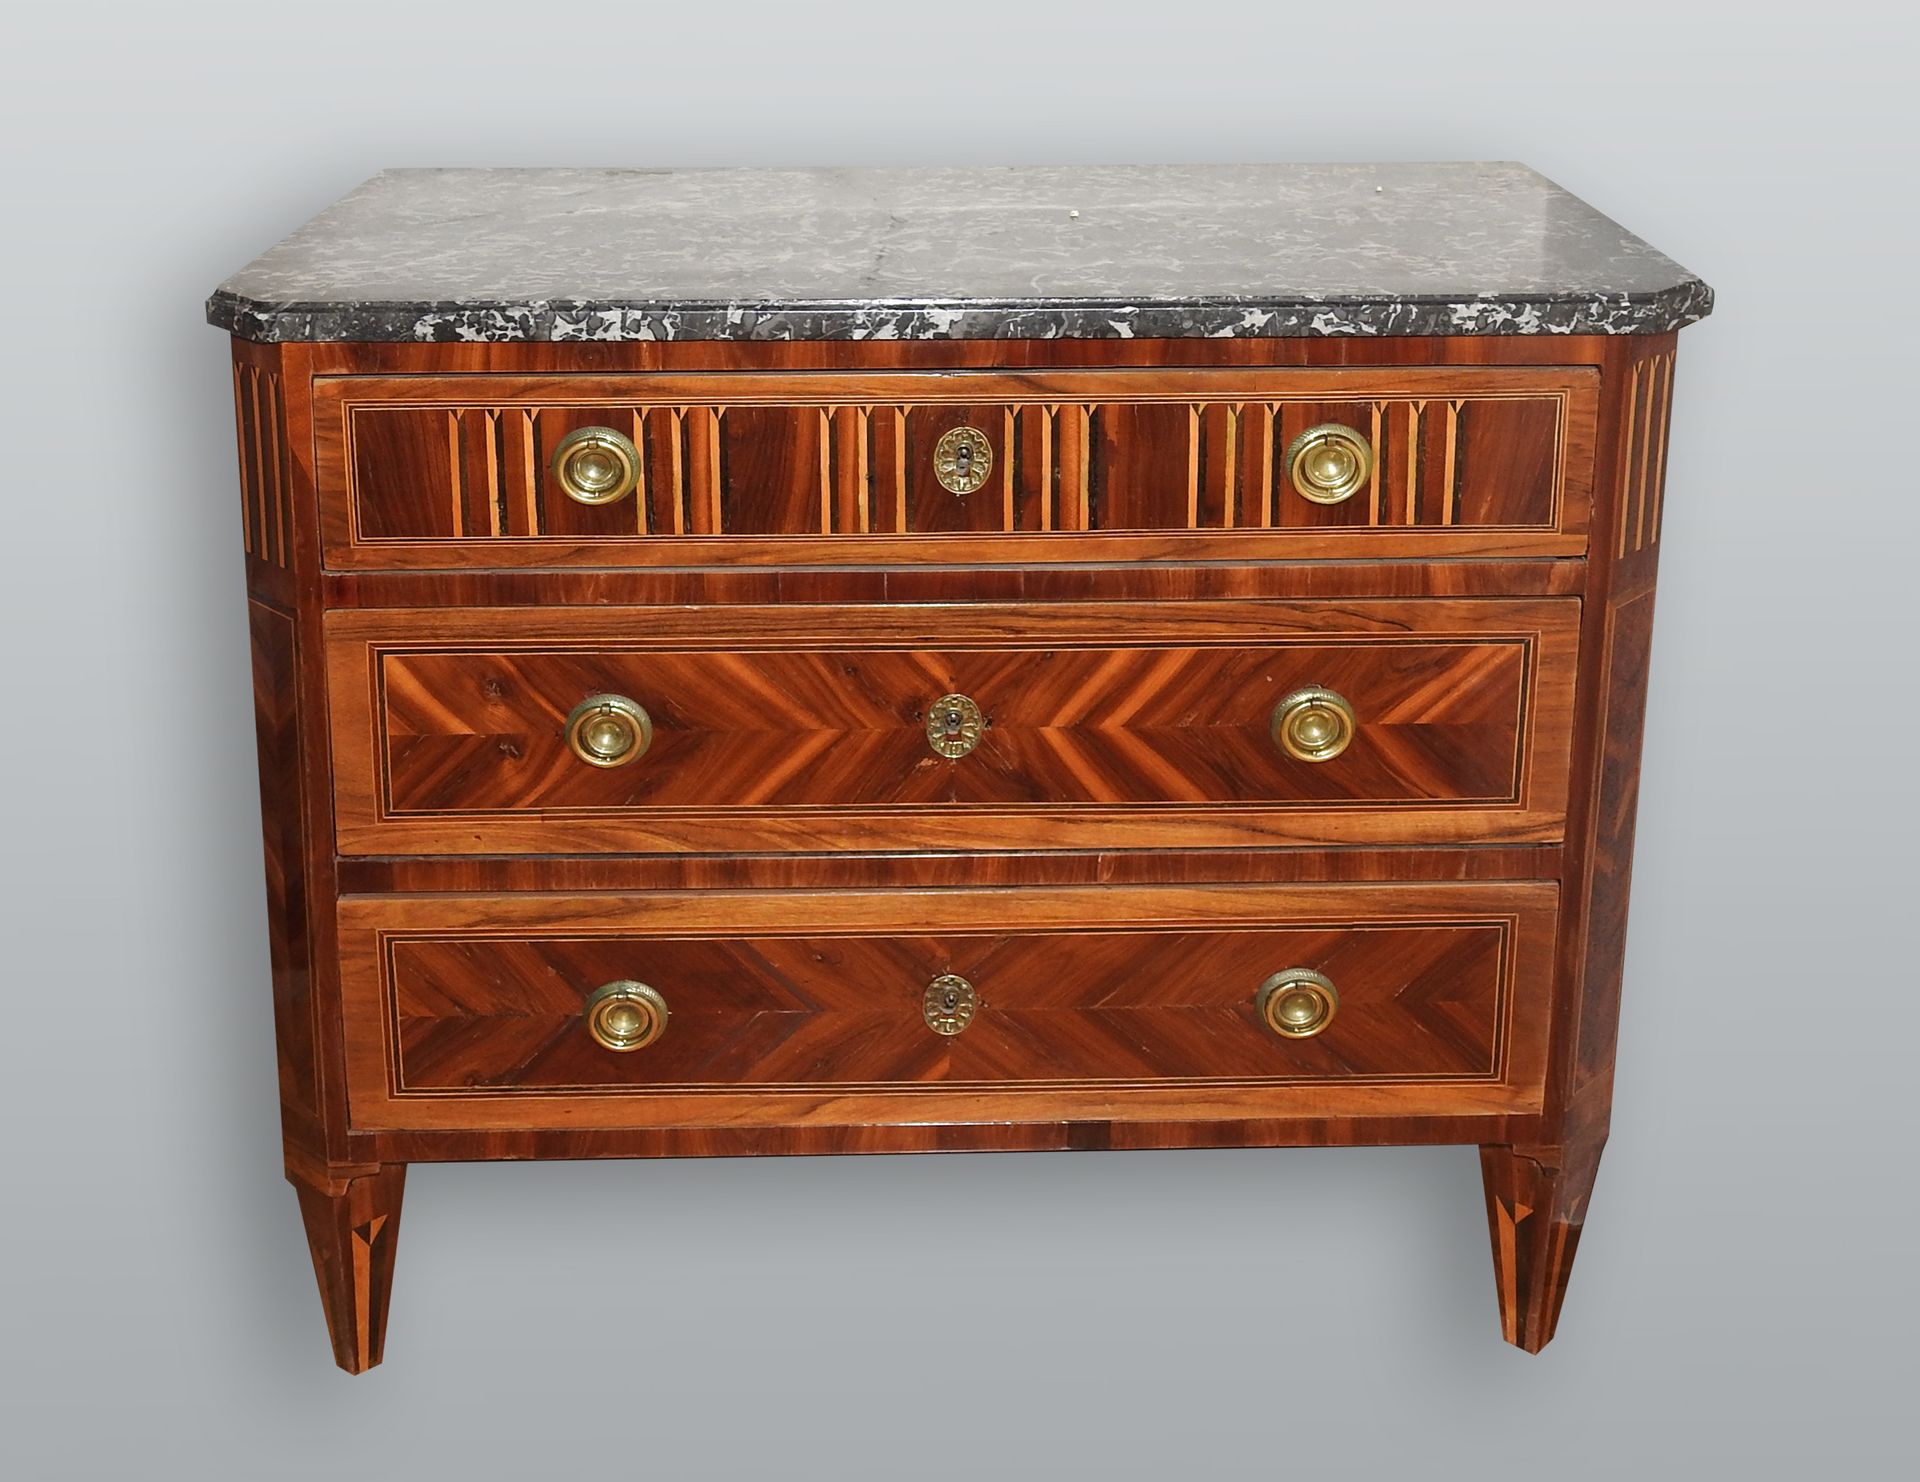 Louis Seize-Kommode Walnut and rosewood, with marble top. 3 drawers. Very beauti&hellip;